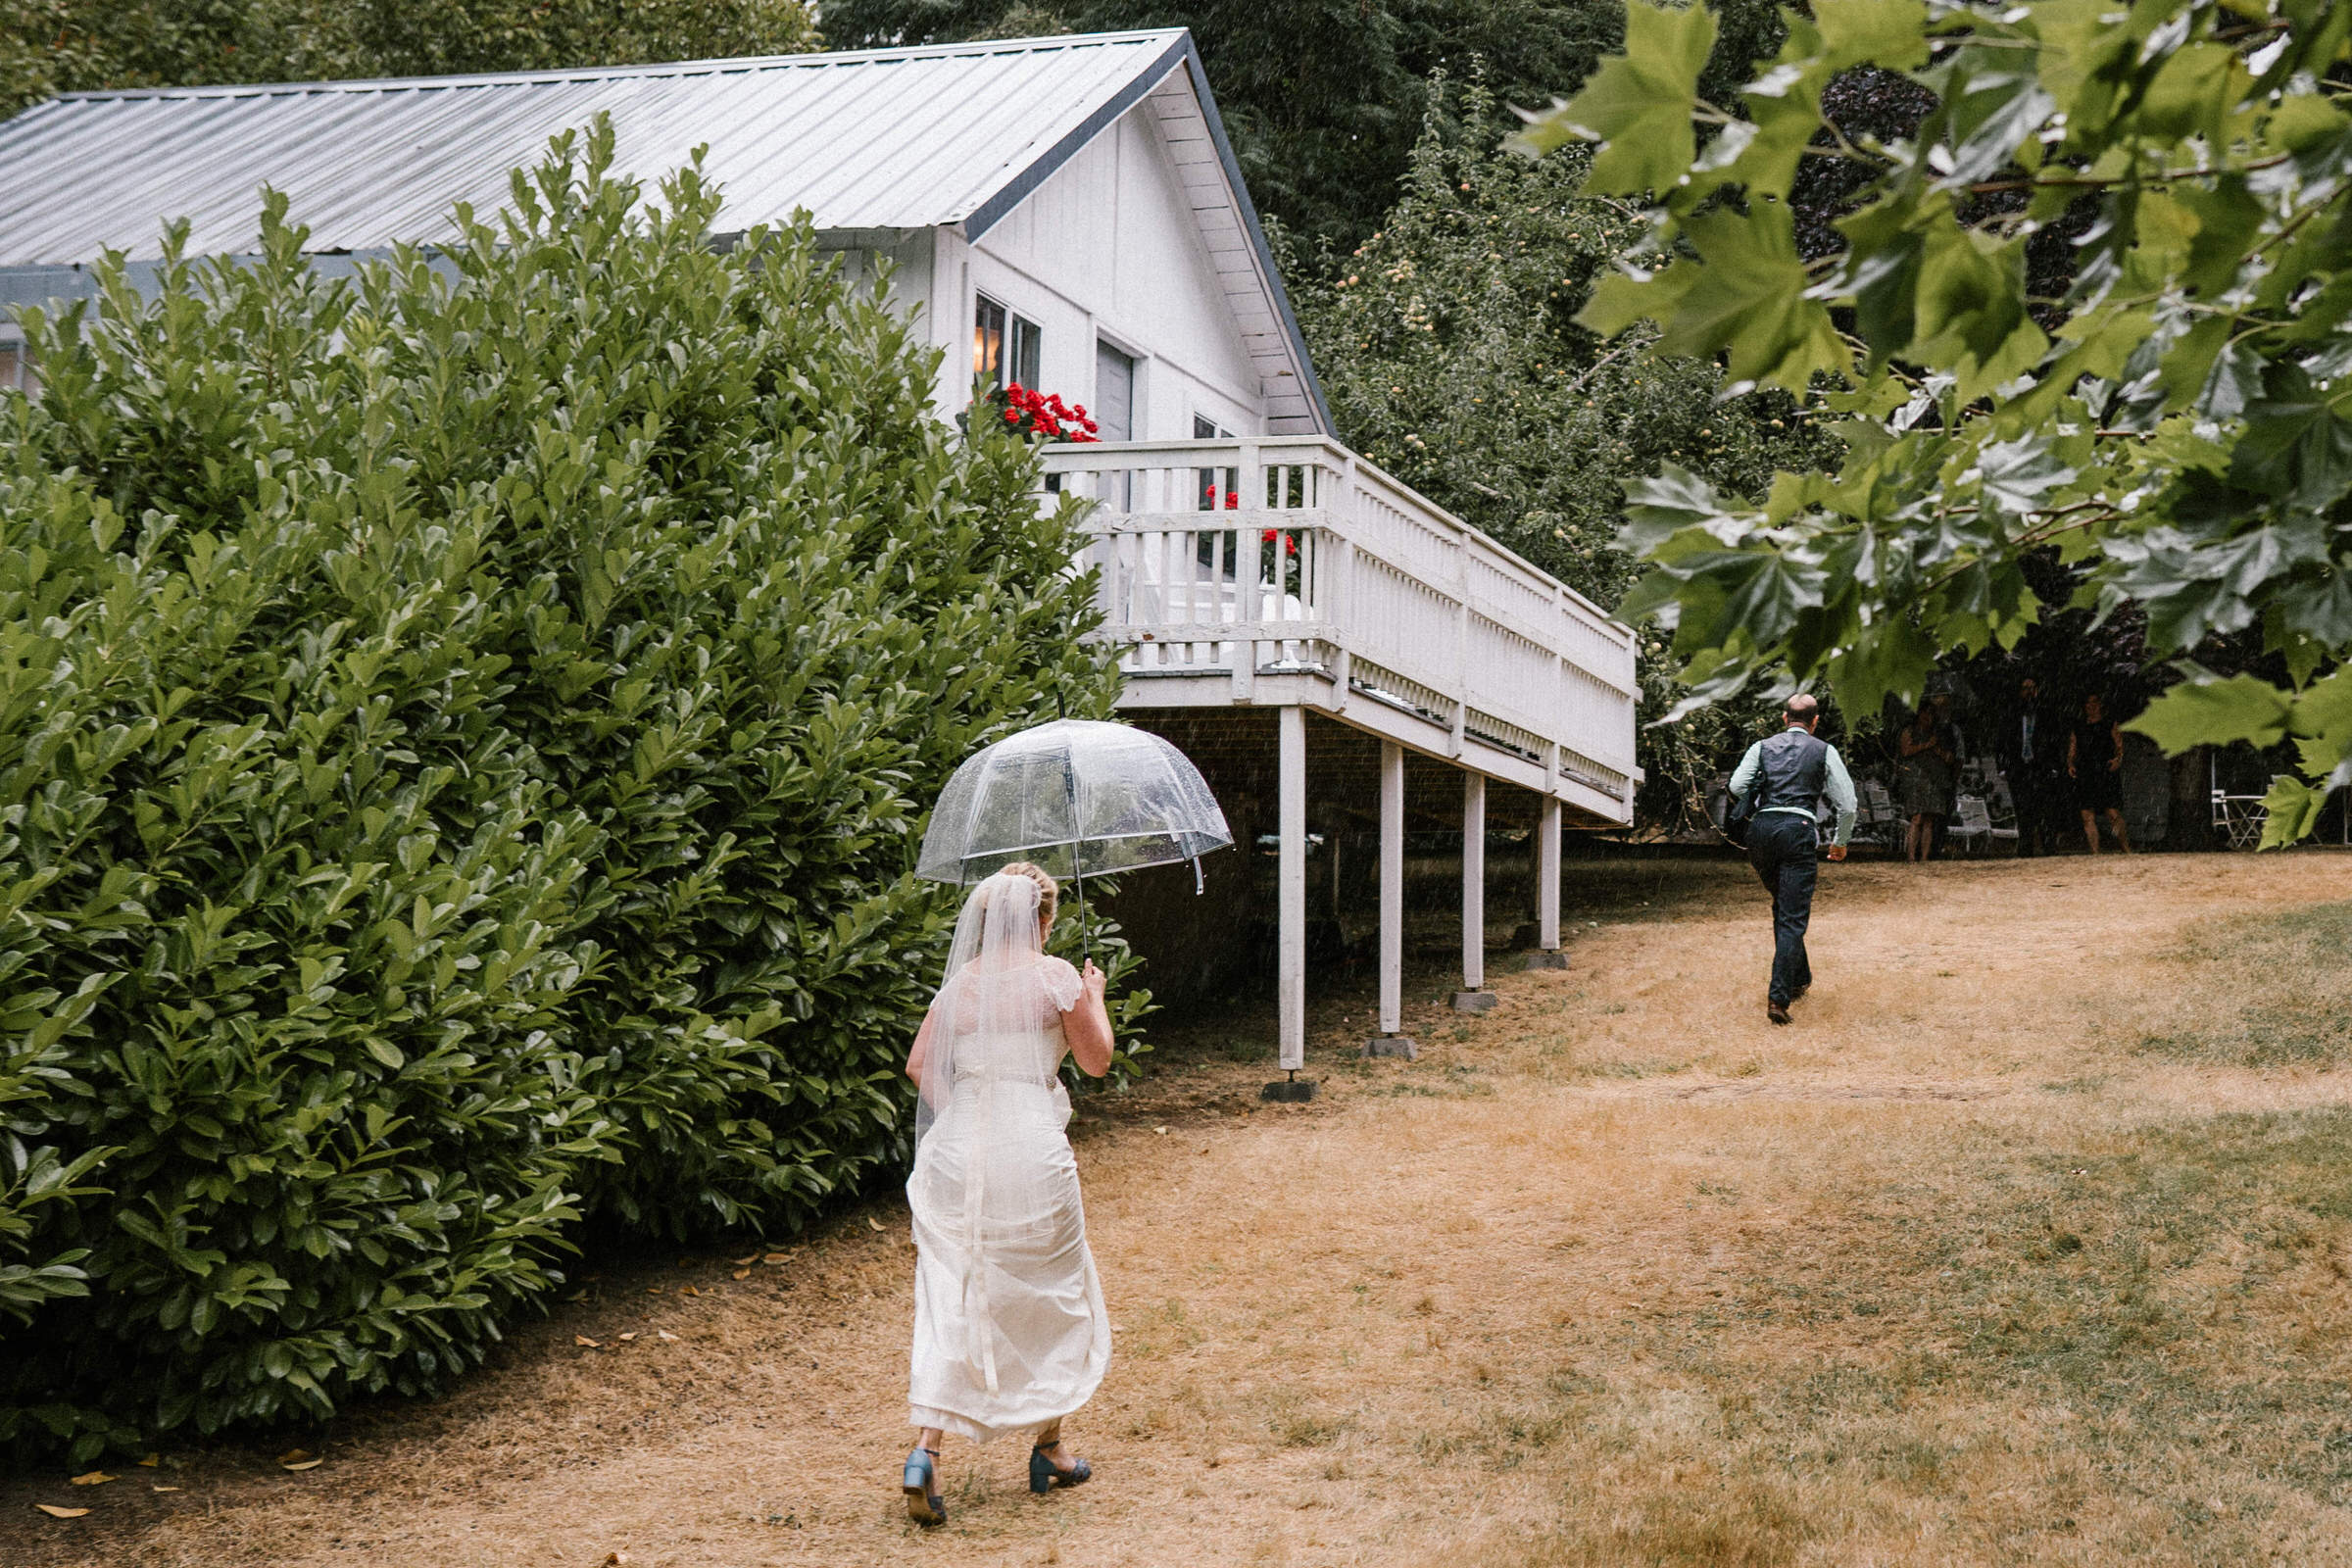 Wayfarer Whidbey Island Wedding: Sara and Joe walk back to their cabin as sprinkles show up but only for a while